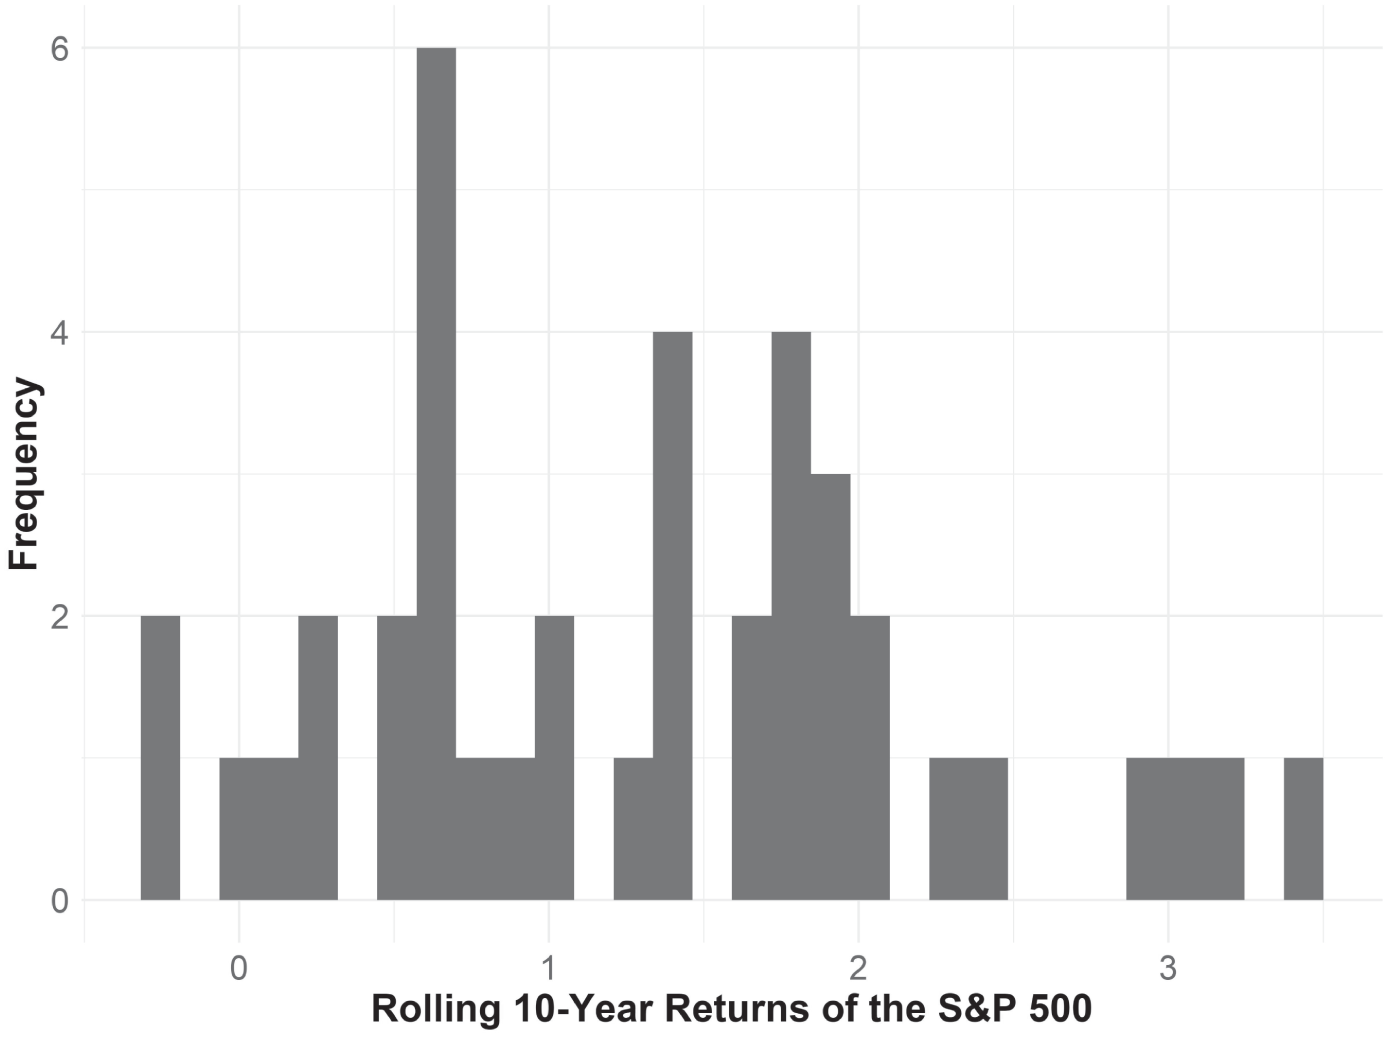 Schematic illustration of Rolling 10-Year Returns of the S&P 500 Index 1970 through 2019